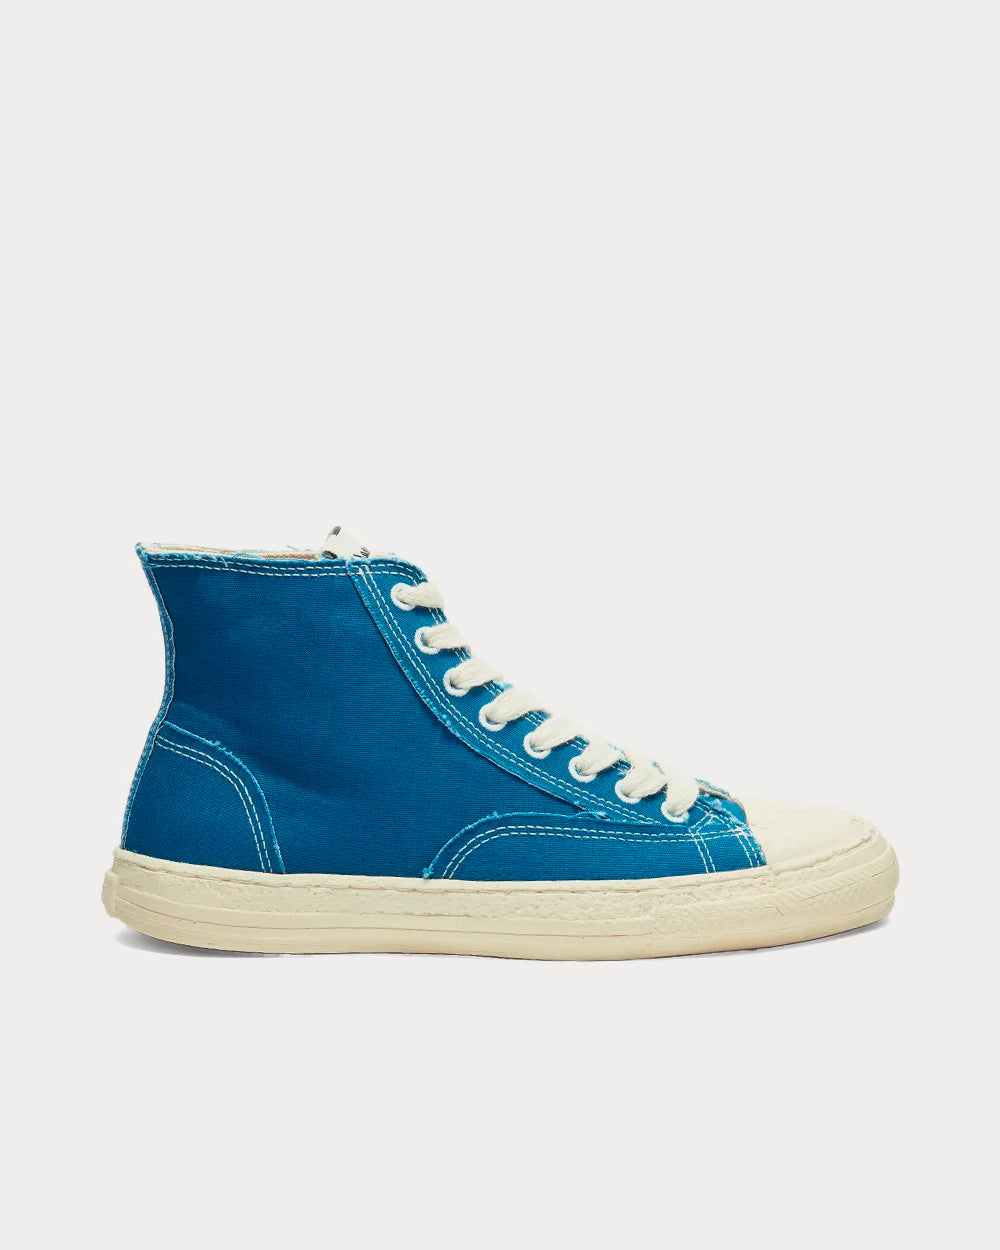 General Scale By Maison Mihara Yasuhiro - Past Sole Blue High Top Sneakers